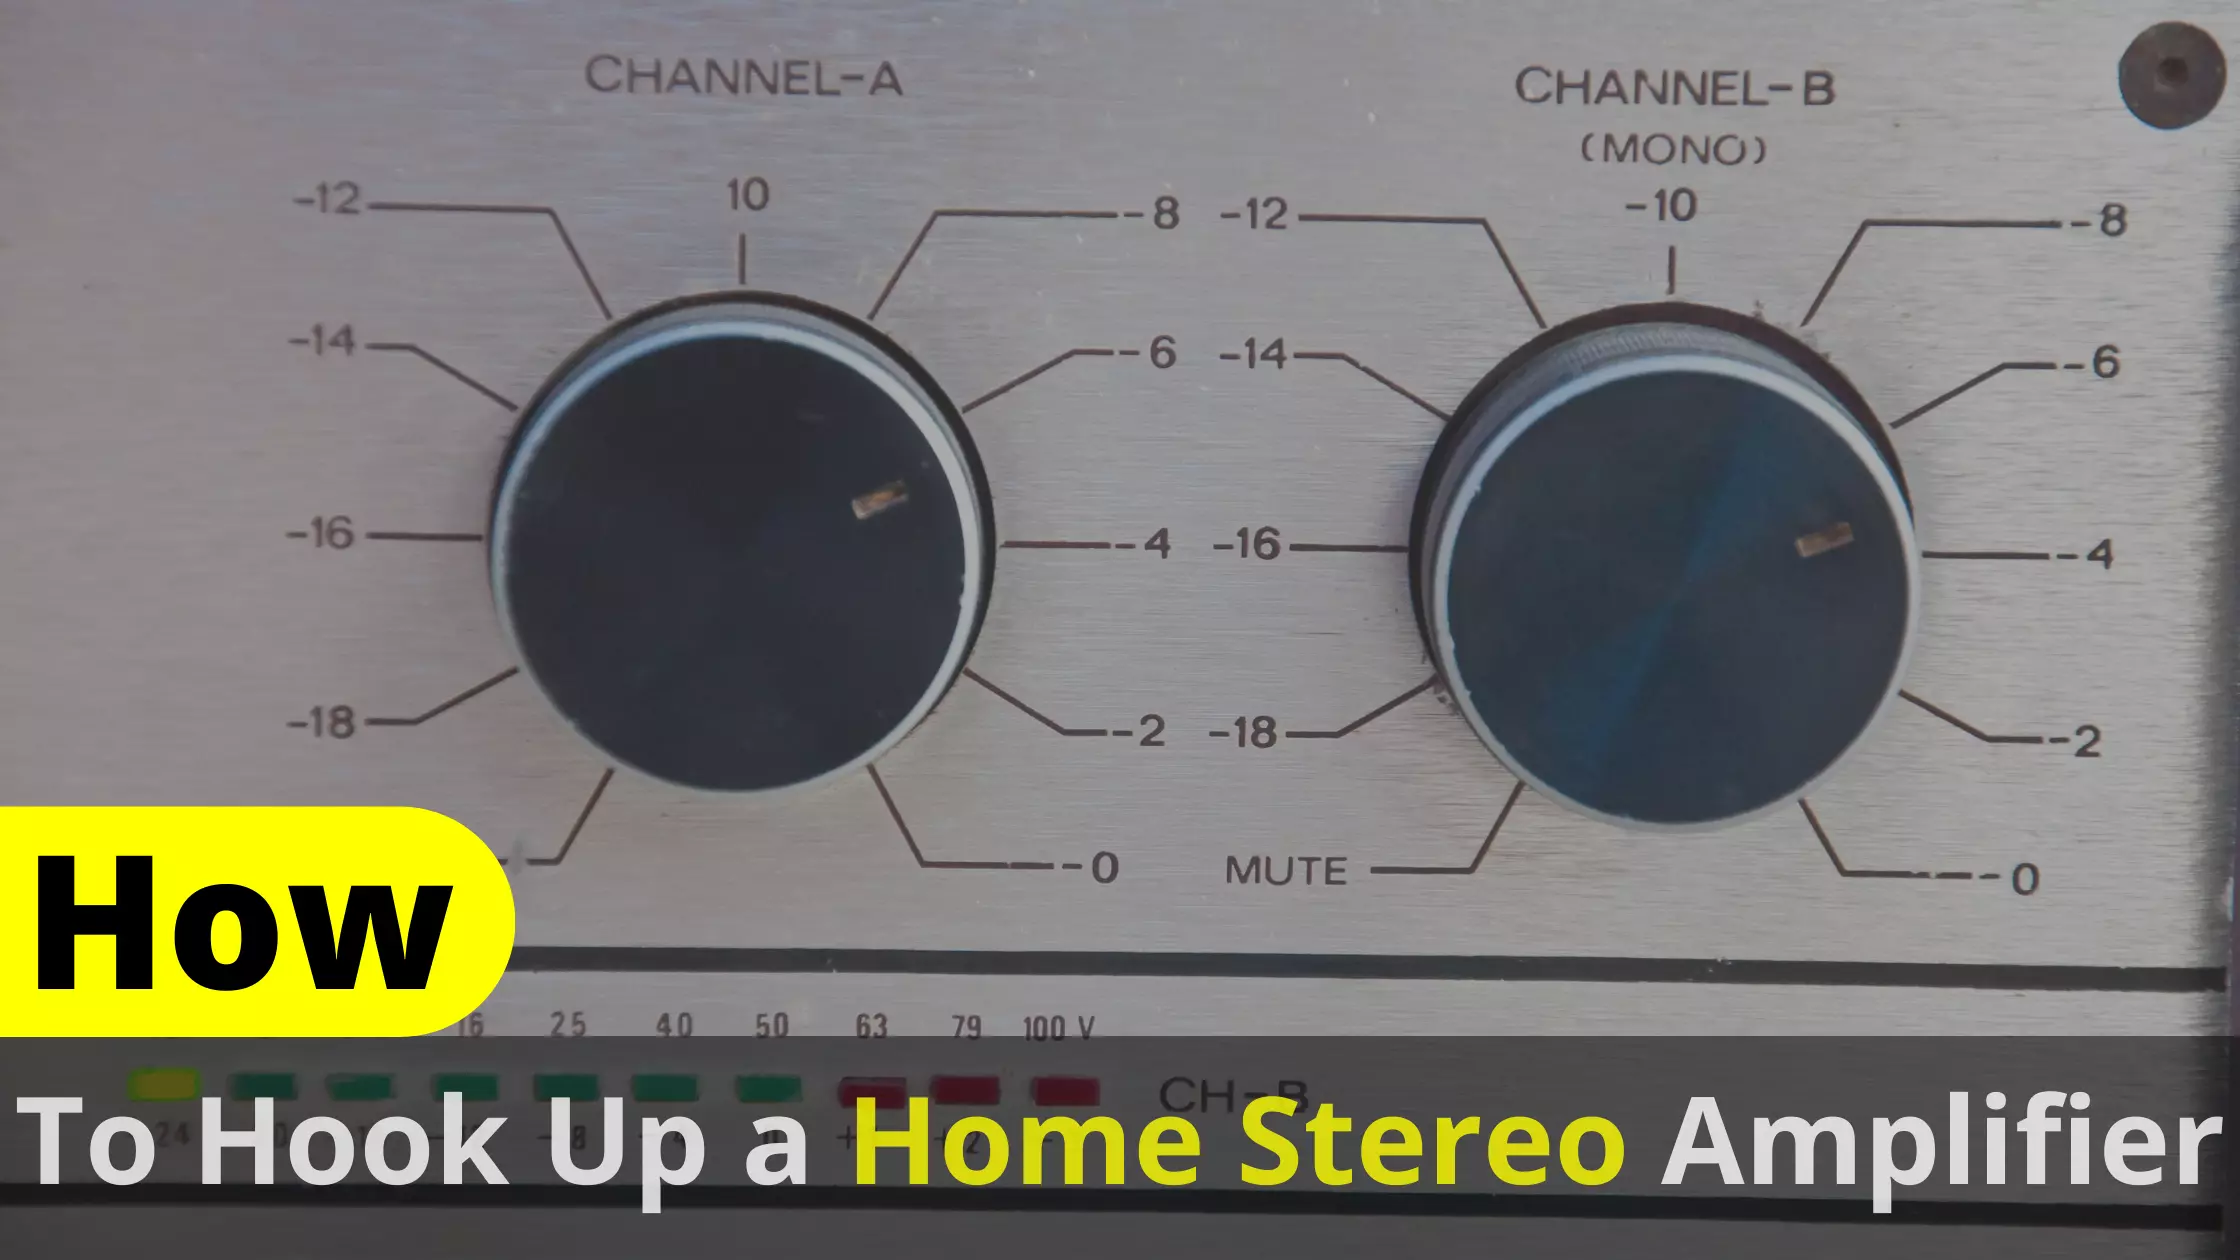 How To Hook Up A Home Stereo Amplifier?